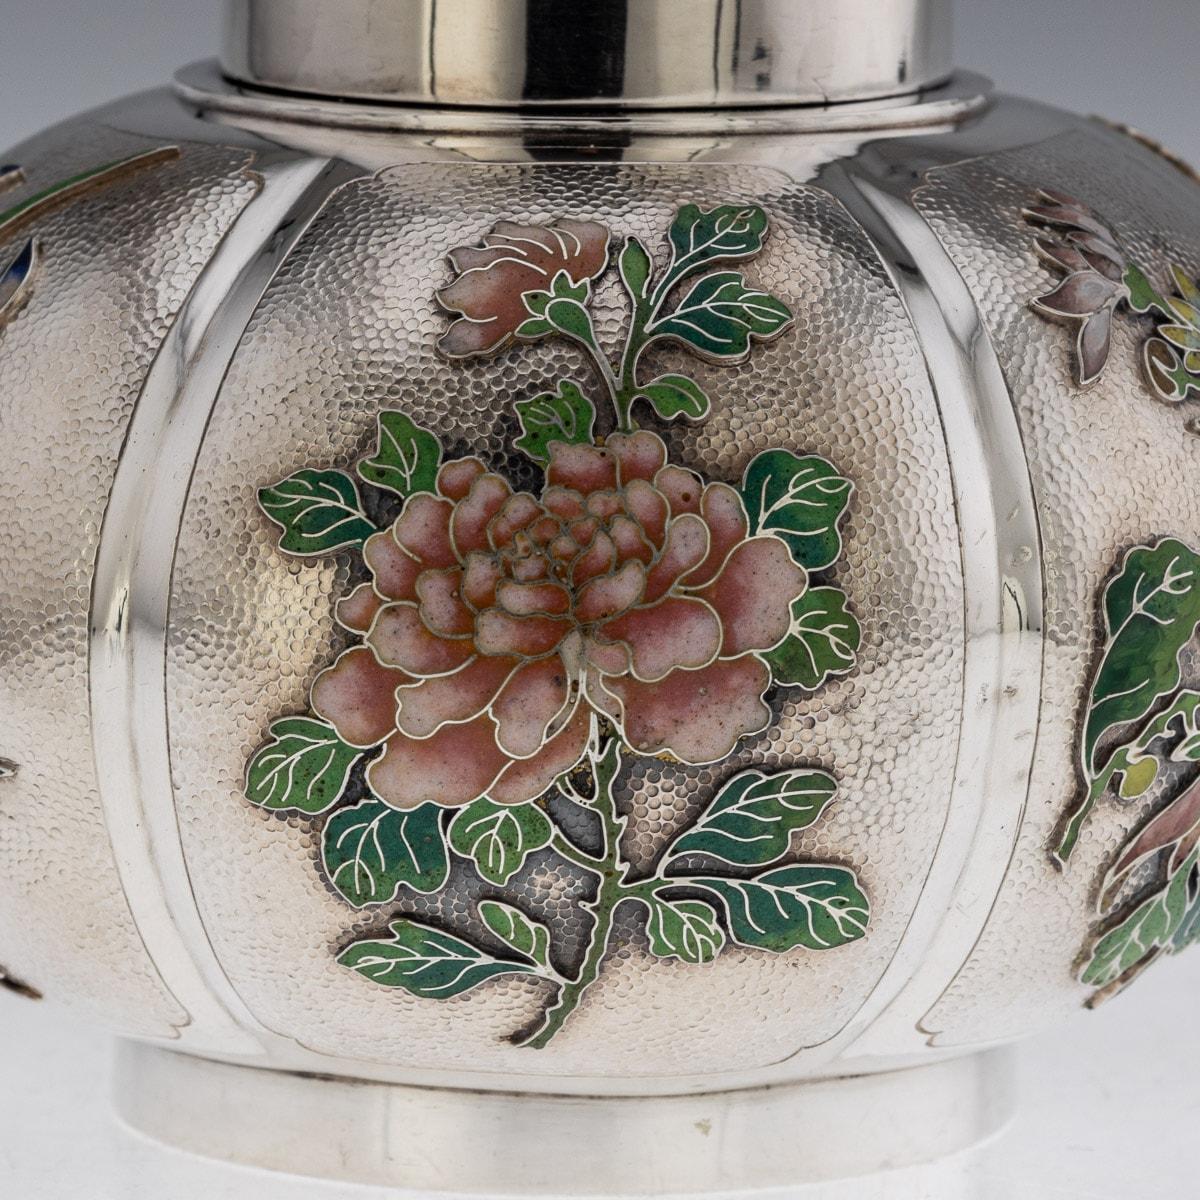 20th Century Chinese Export Solid Silver & Enamel Tea Caddy, Luen Wo, c.1900 11